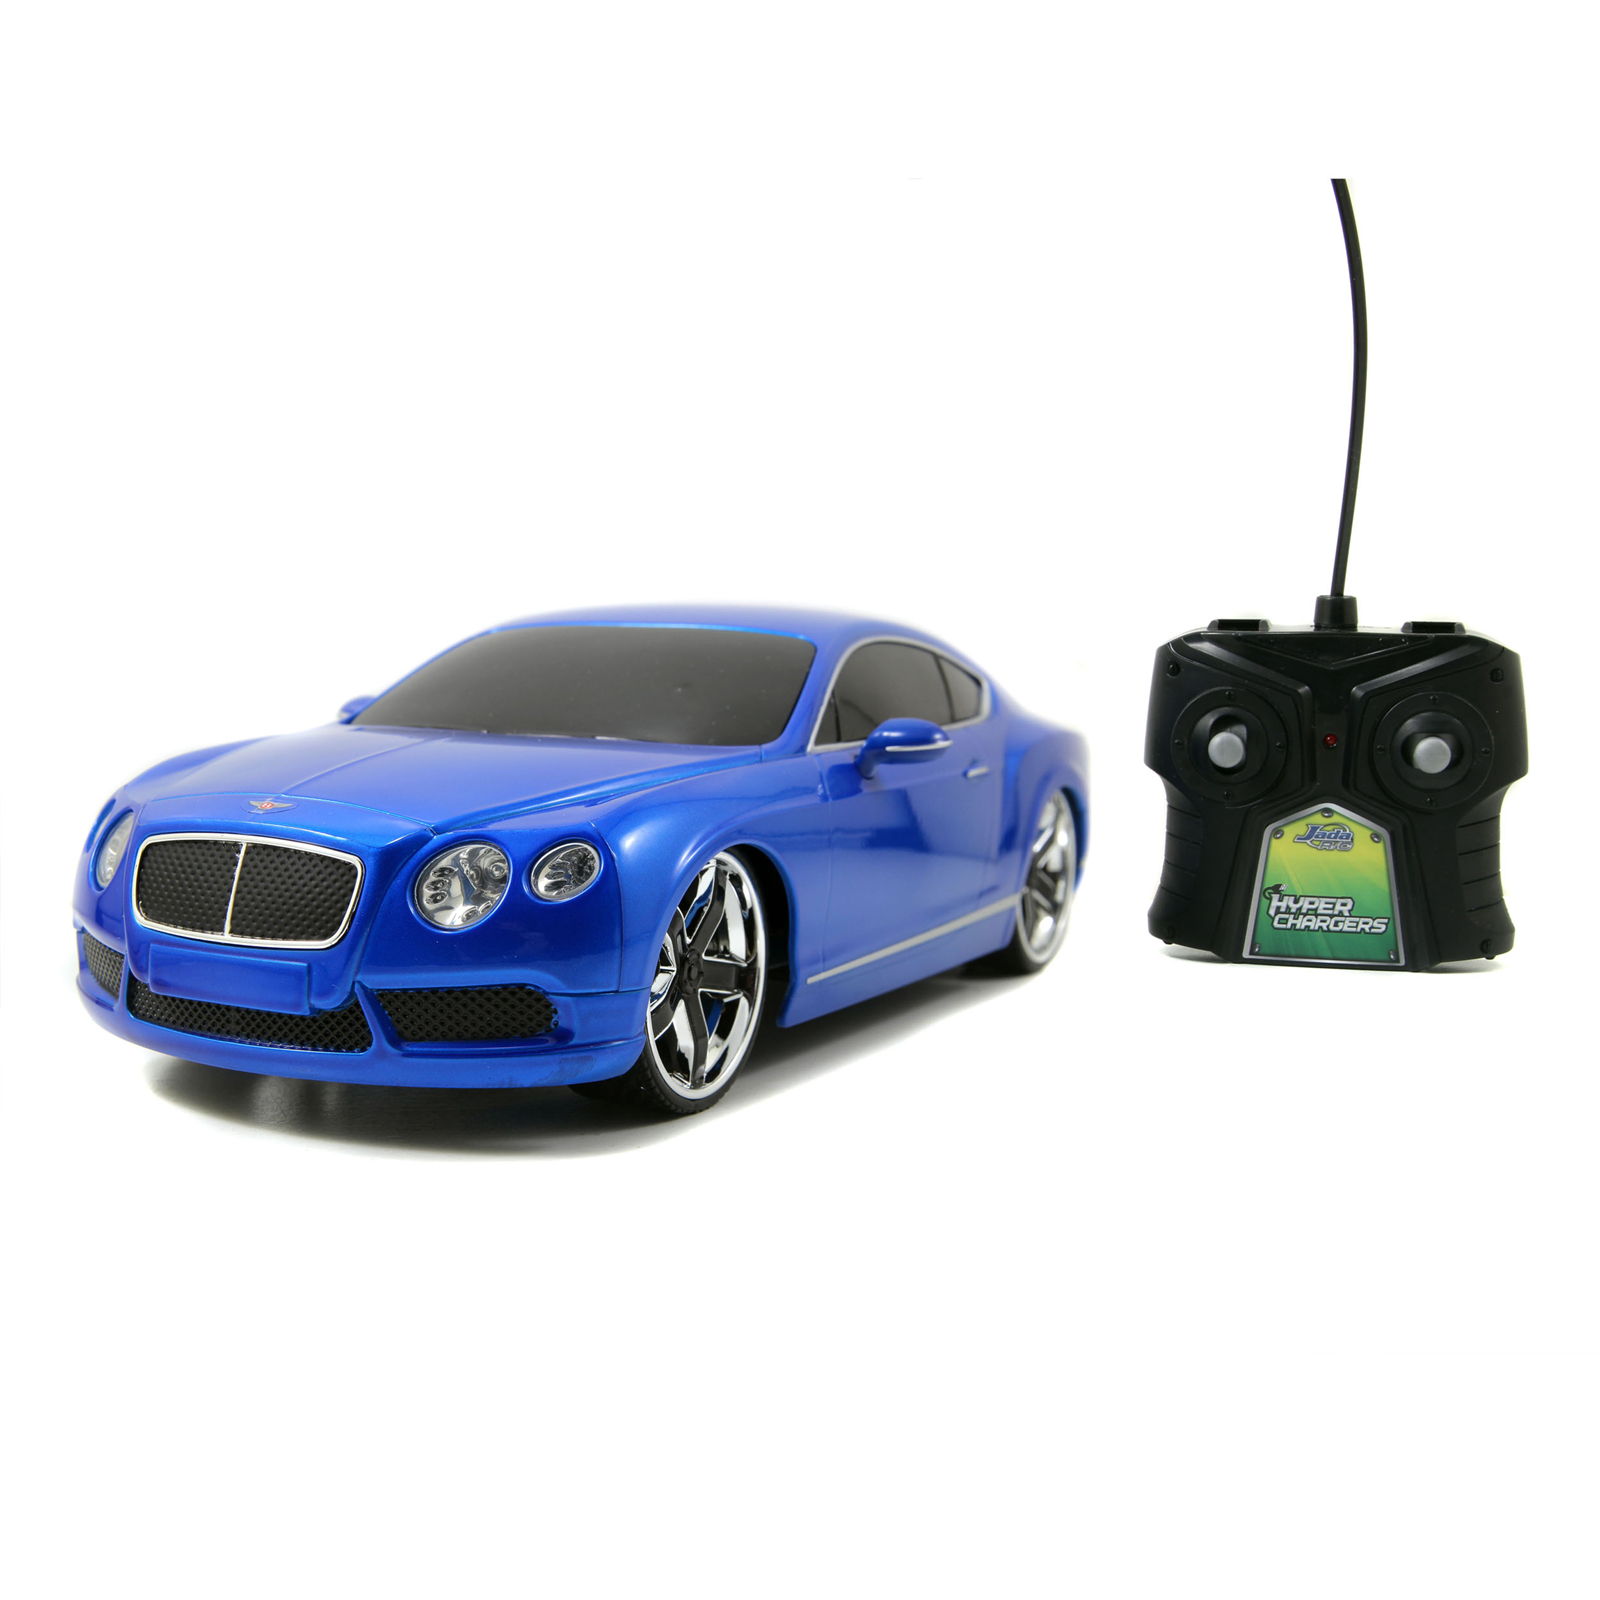 HyperChargers 1:16 Tuner Exotic Bentley GT Remote Control Car